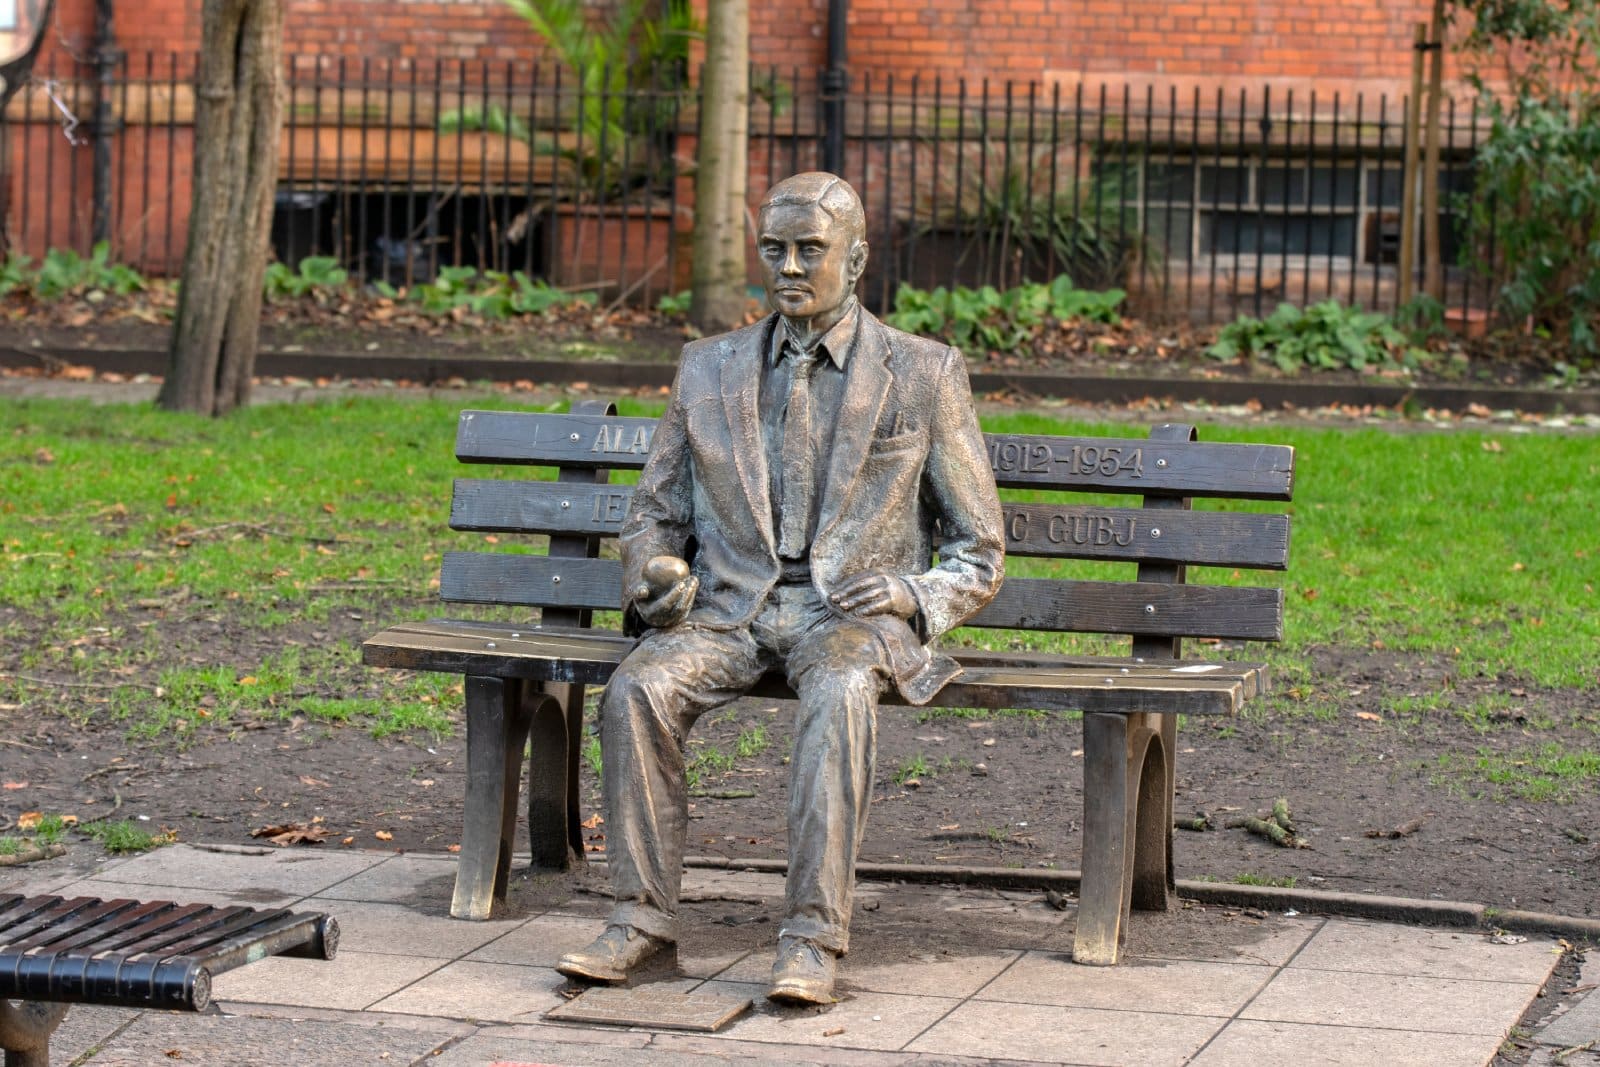 Image Credit: Shutterstock / Dutchmen Photography <p><span>Located in Sackville Park, the Alan Turing Memorial commemorates the life and legacy of the pioneering computer scientist who was persecuted for his homosexuality. The memorial is a poignant reminder of the impact of anti-LGBTQ+ legislation and the contributions of LGBTQ+ individuals to science and technology.</span></p>